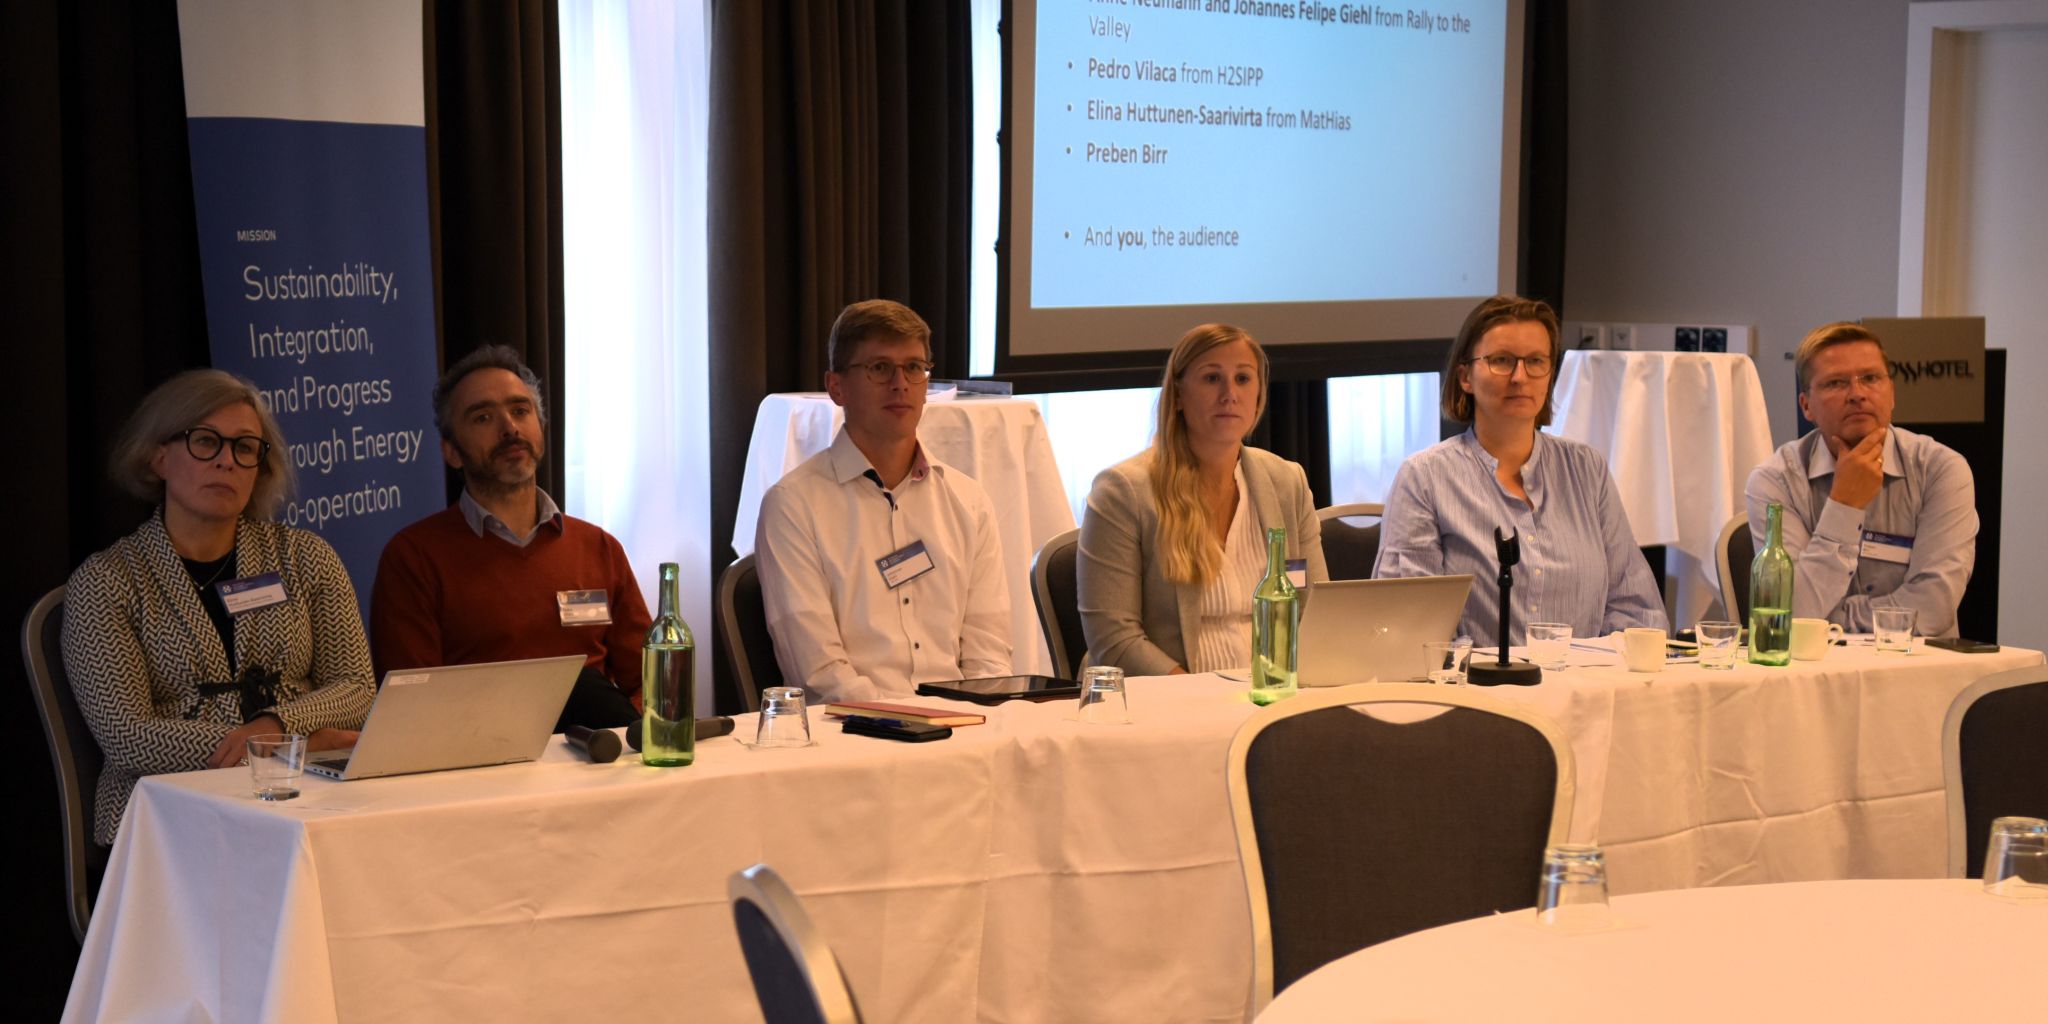 Photograph from the Nordic Hydrogen Valleys conference. Presenters sitting at a long table while addressing the audience.